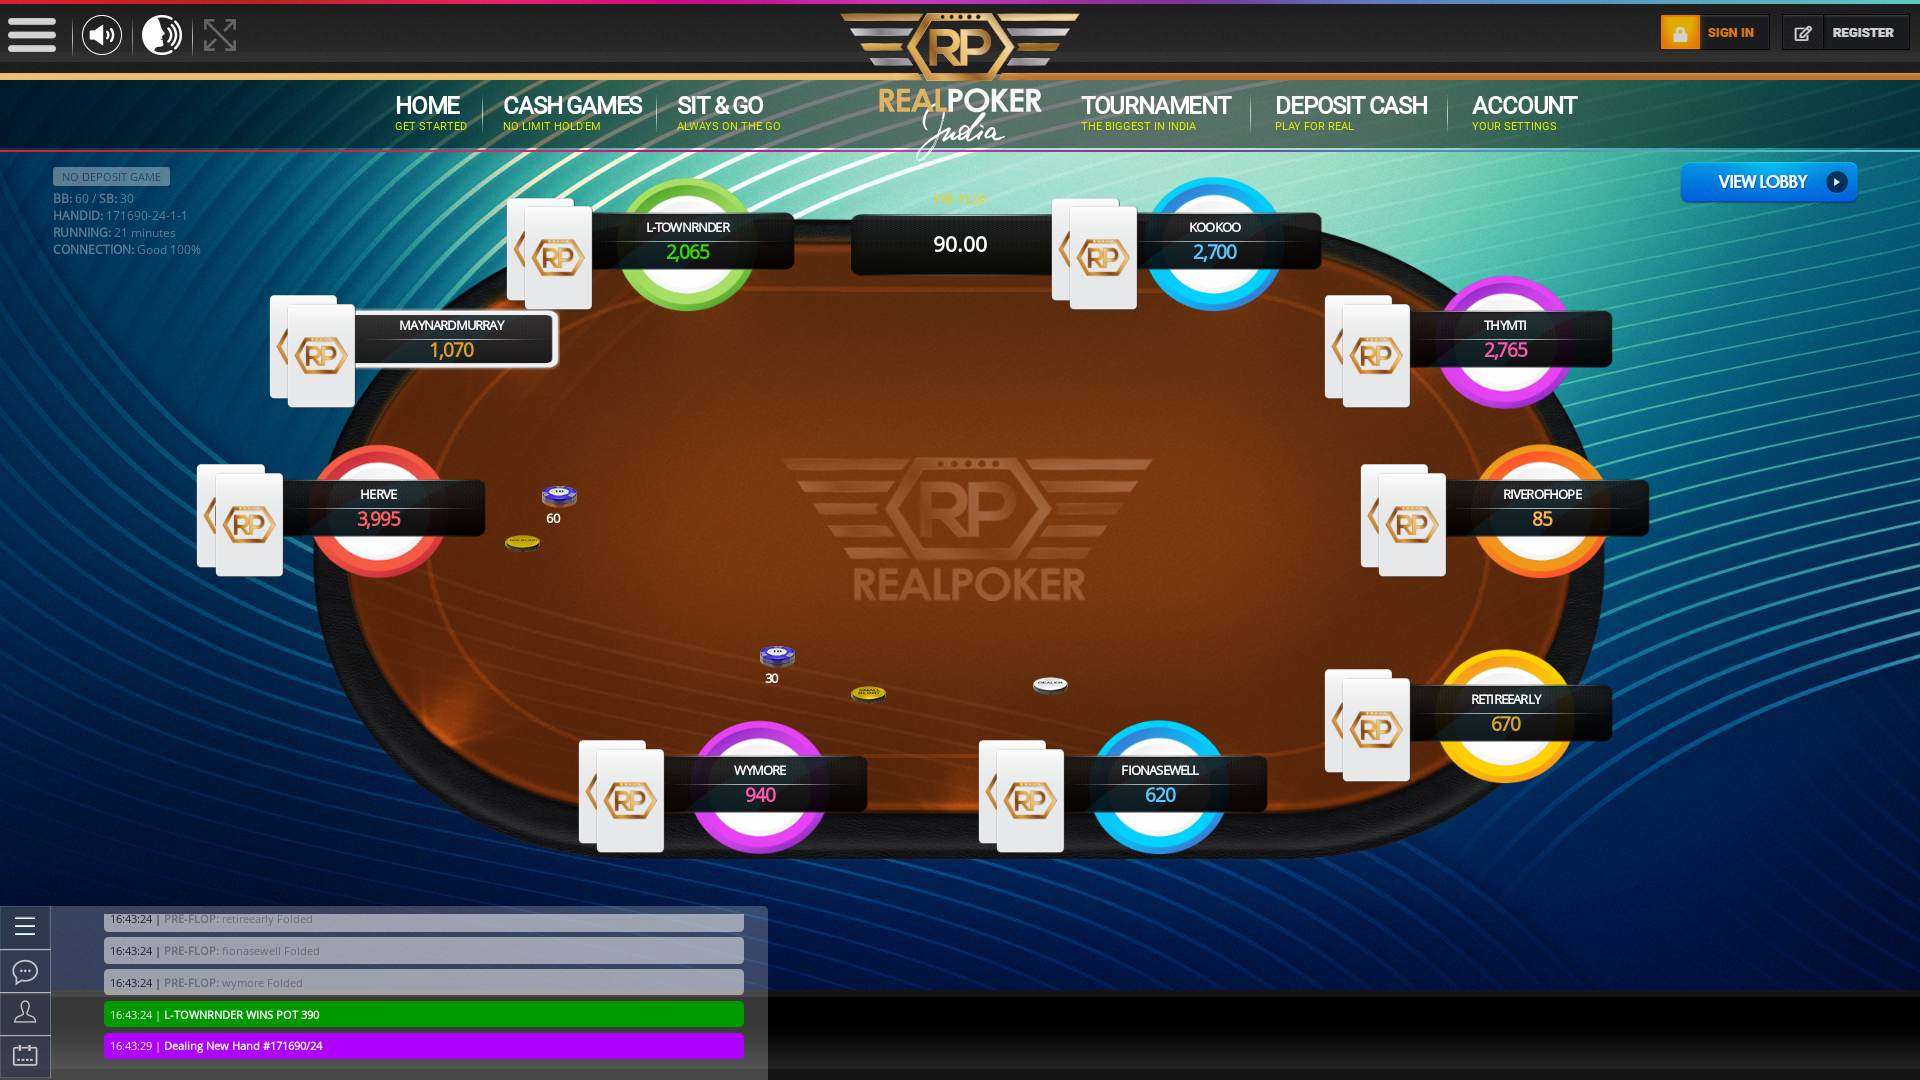 Indian online poker on a 10 player table in the 21st minute match up